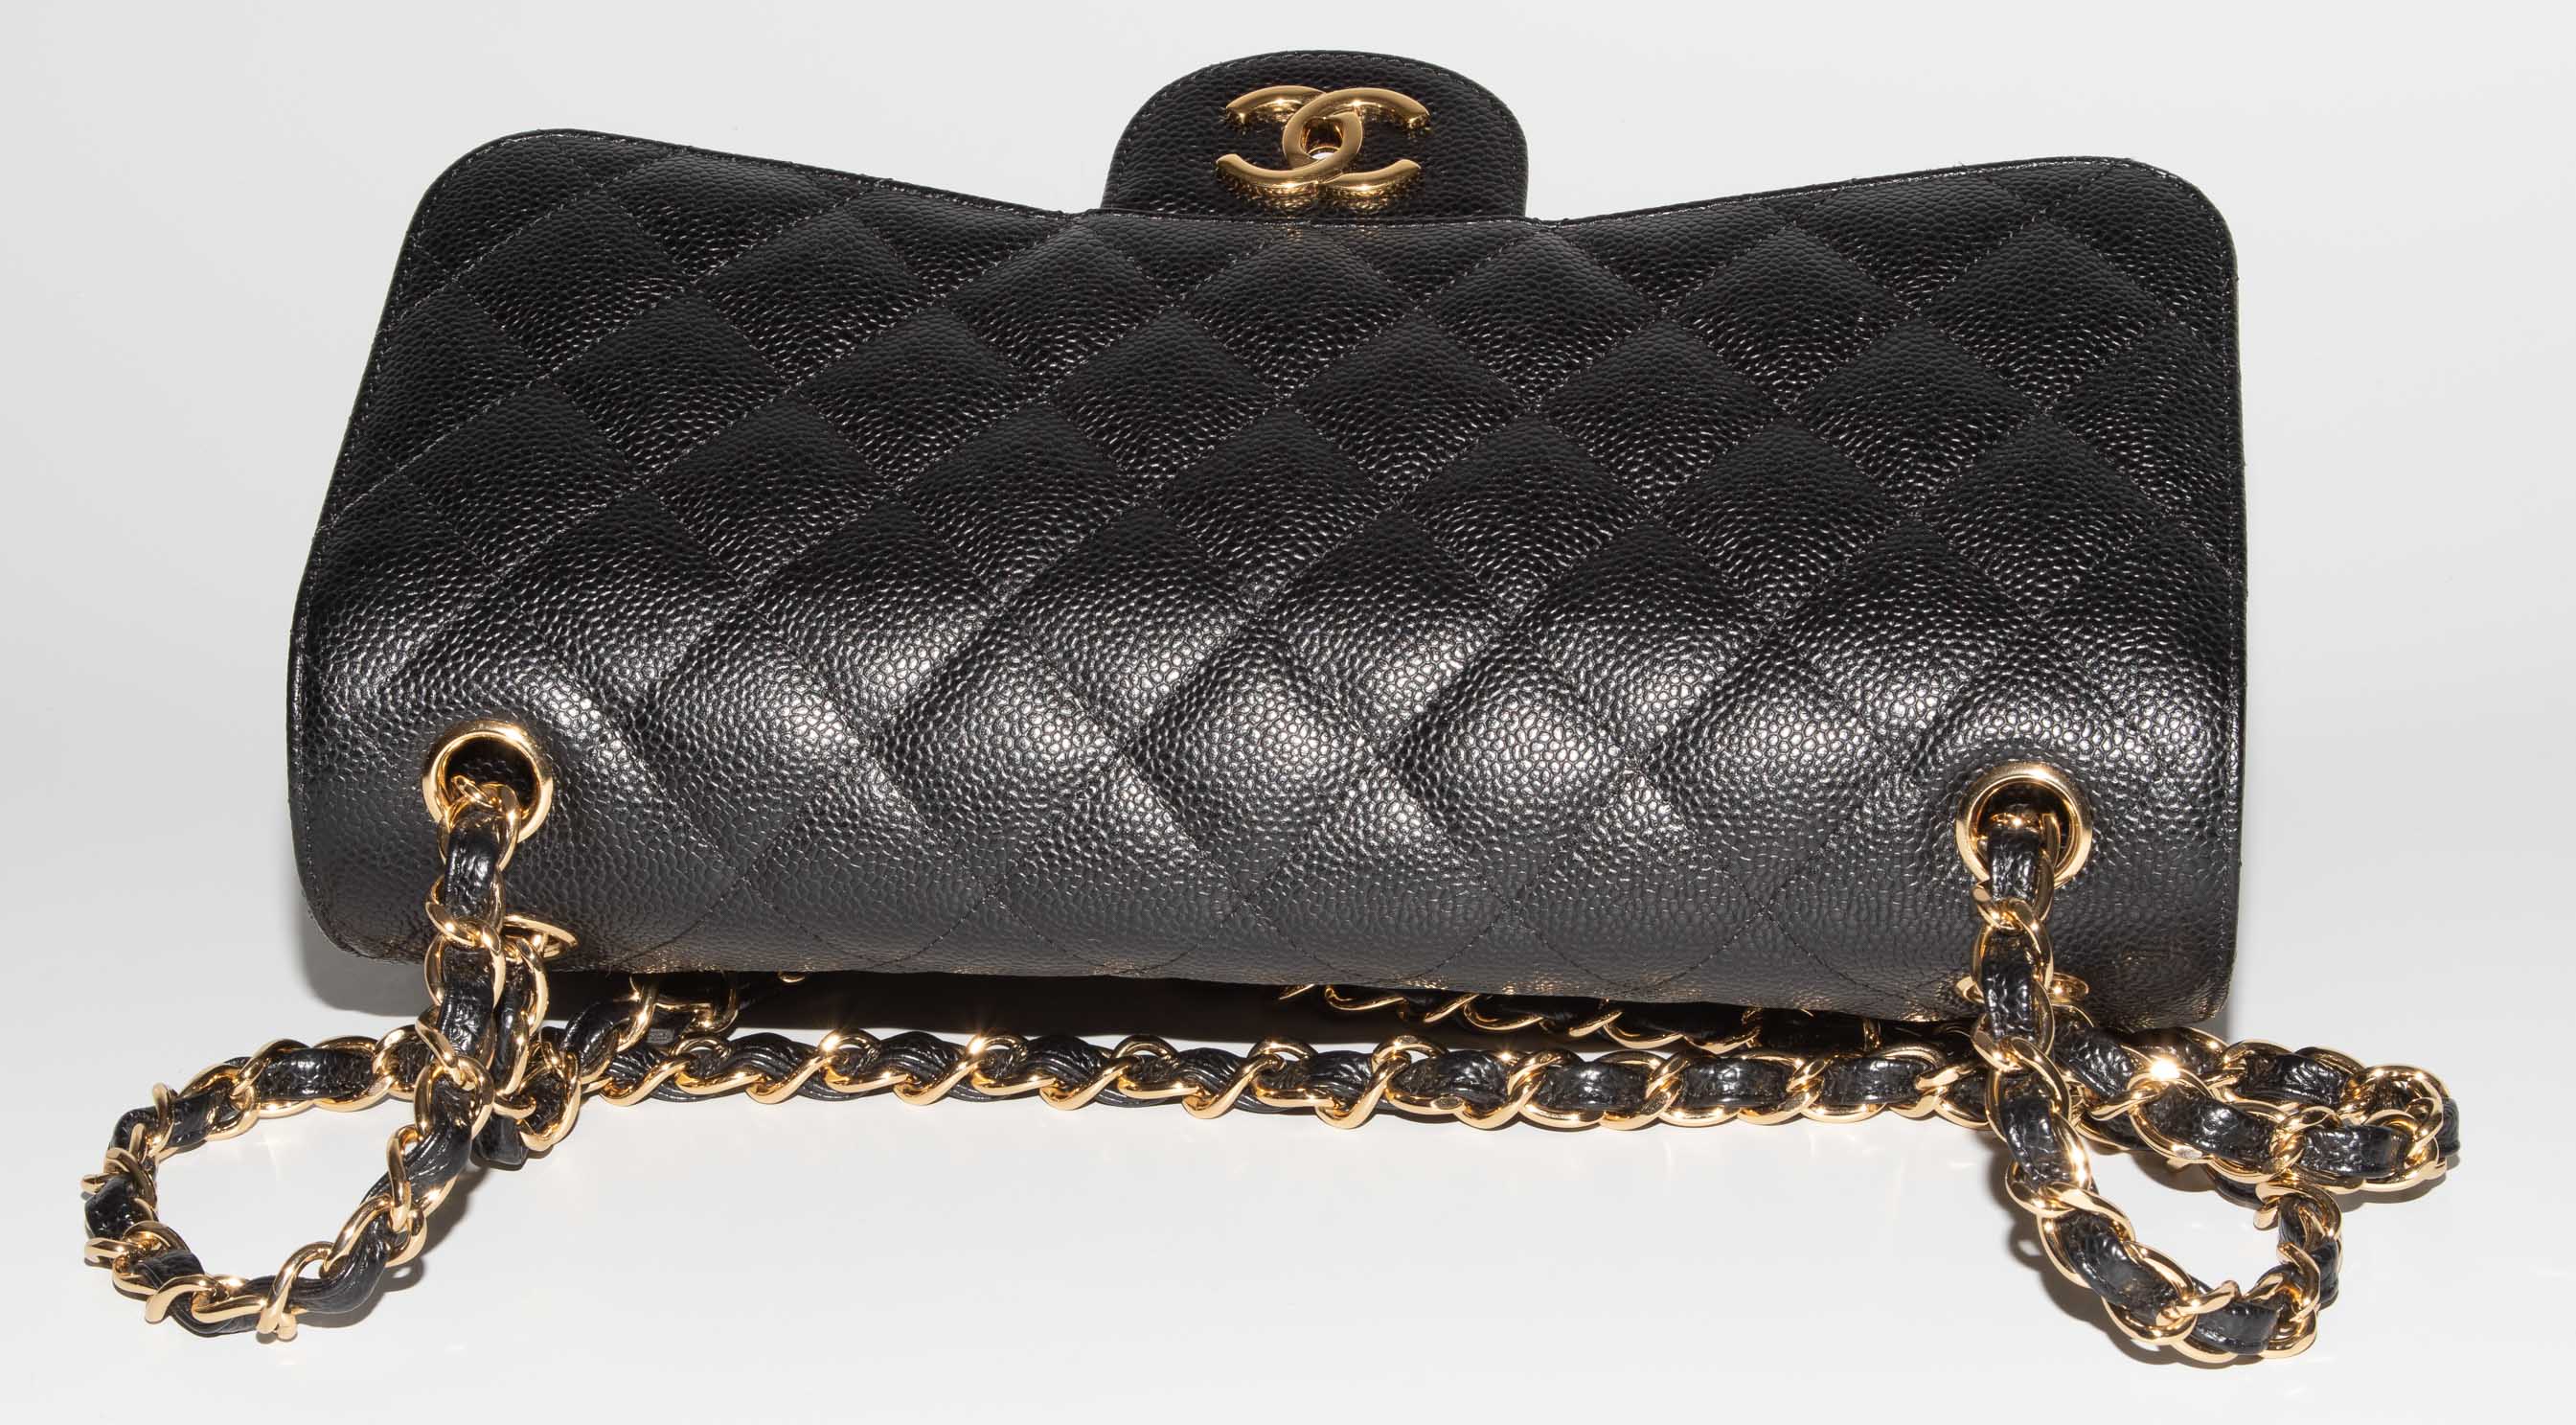 Chanel, Tasche "Timeless" - Image 15 of 16